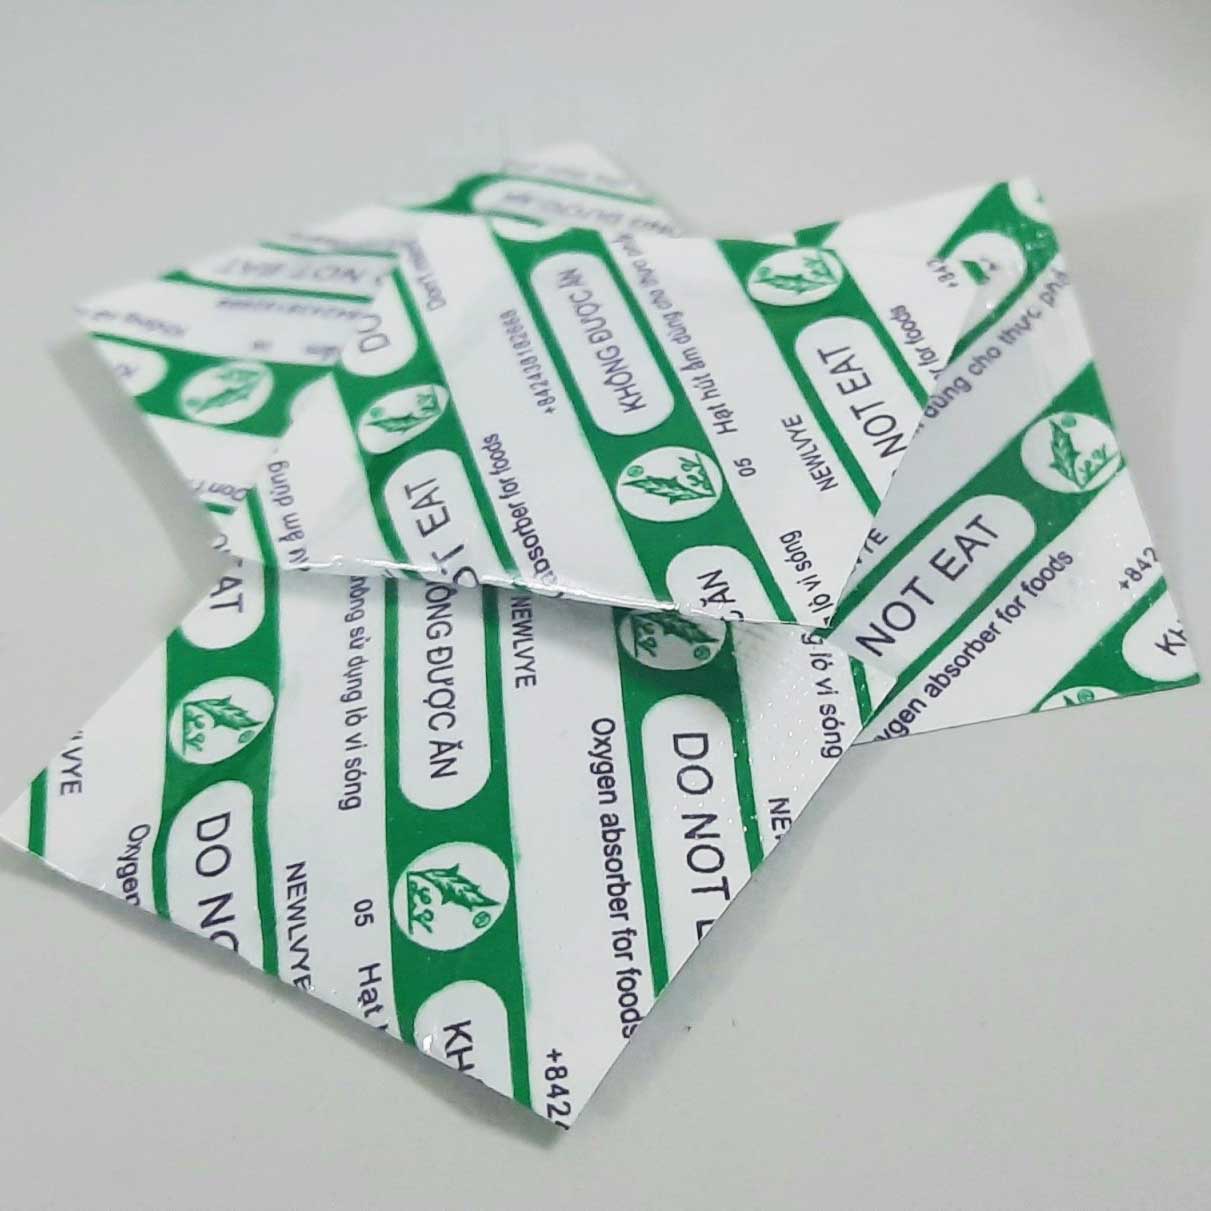 Oxygen Absorber | HLC VIET NAM JOINT STOCK COMPANY